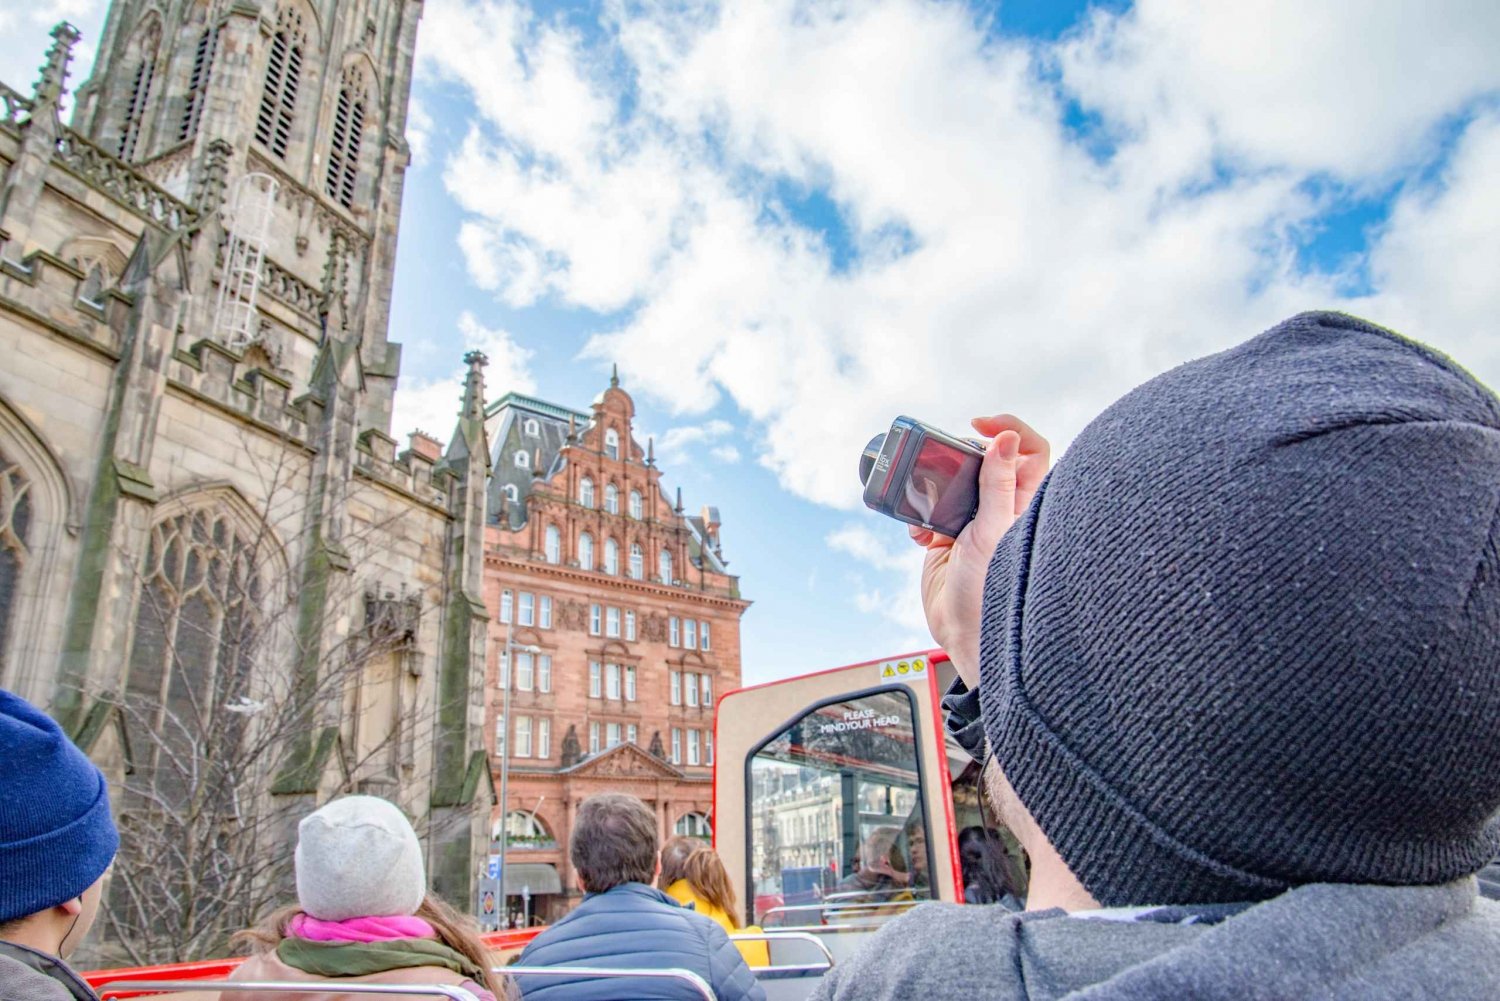 Edinburgh: Hop-On Hop-Off Bus Tours & Firth of Forth Cruise